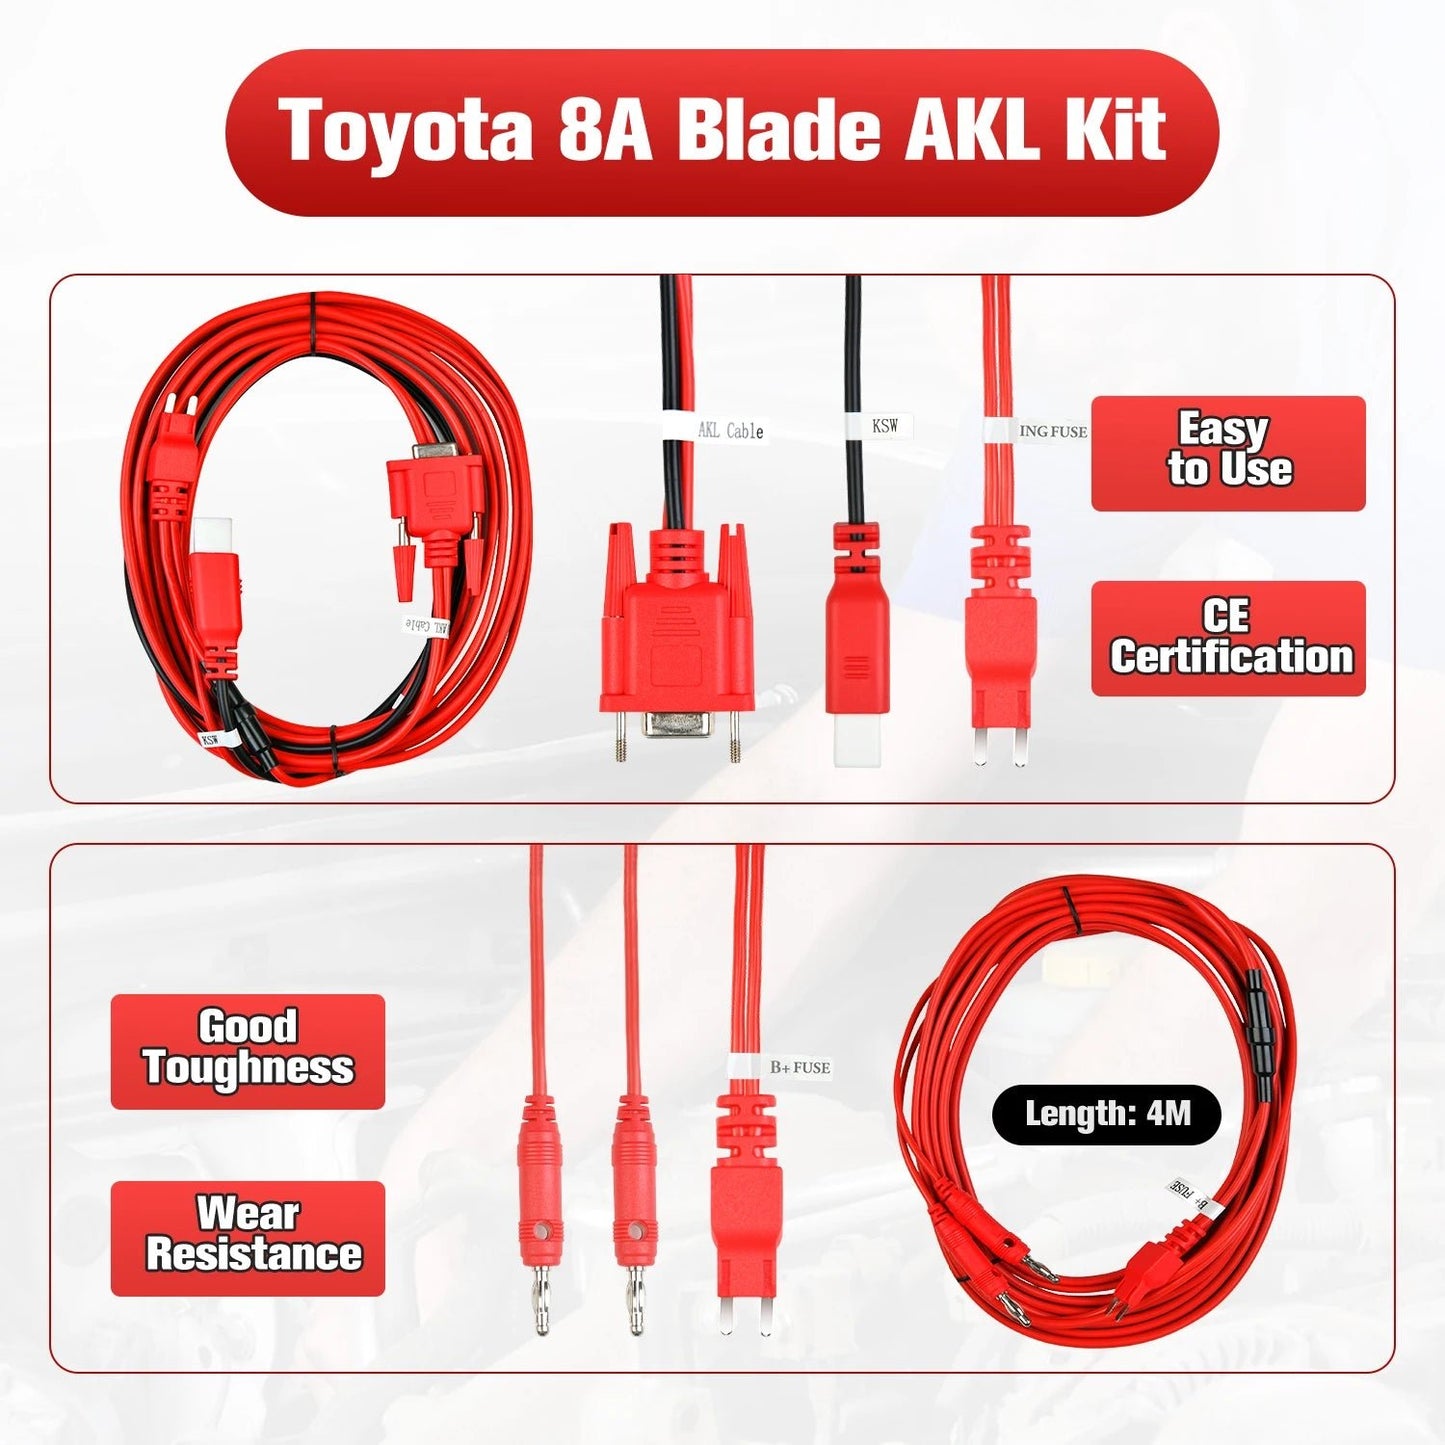 Autel Toyota 8A AKL Cable Blade Key All Keys Lost Adapter Autel Key Programming Accessory Work with IM508/ IM608 and G-Box3 - Dynamex